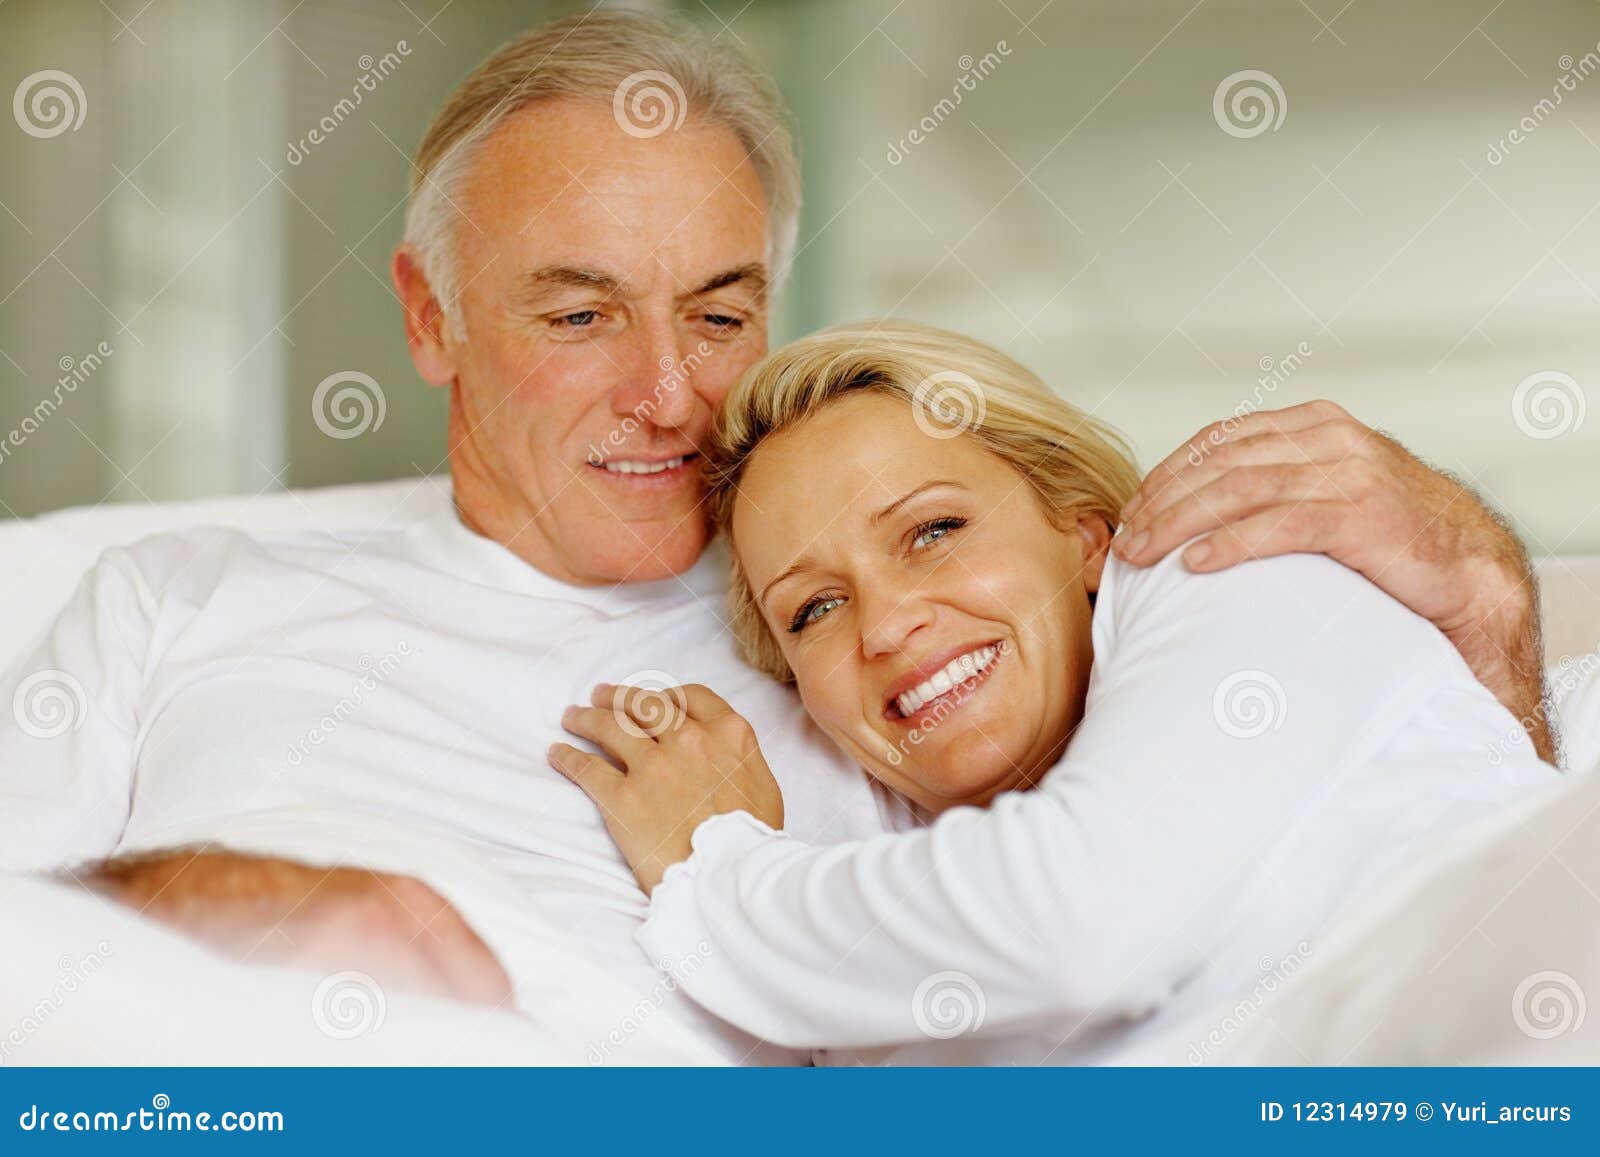 Smiling Old Couple Relaxing Indoors Stock Image Image Of